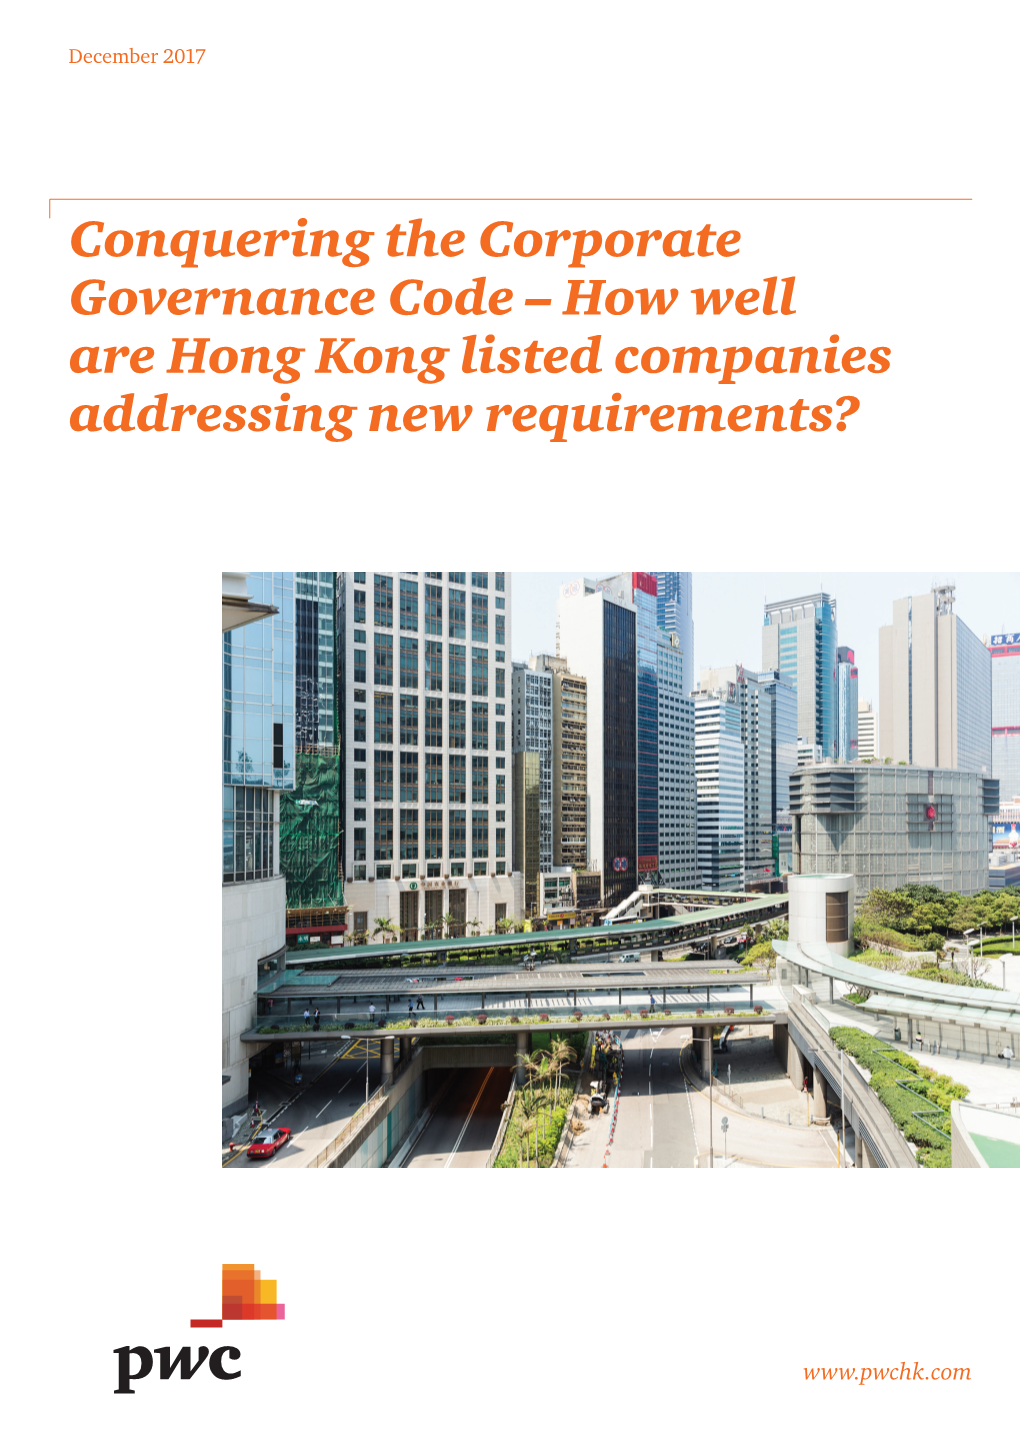 Conquering the Corporate Governance Code – How Well Are Hong Kong Listed Companies Addressing New Requirements?